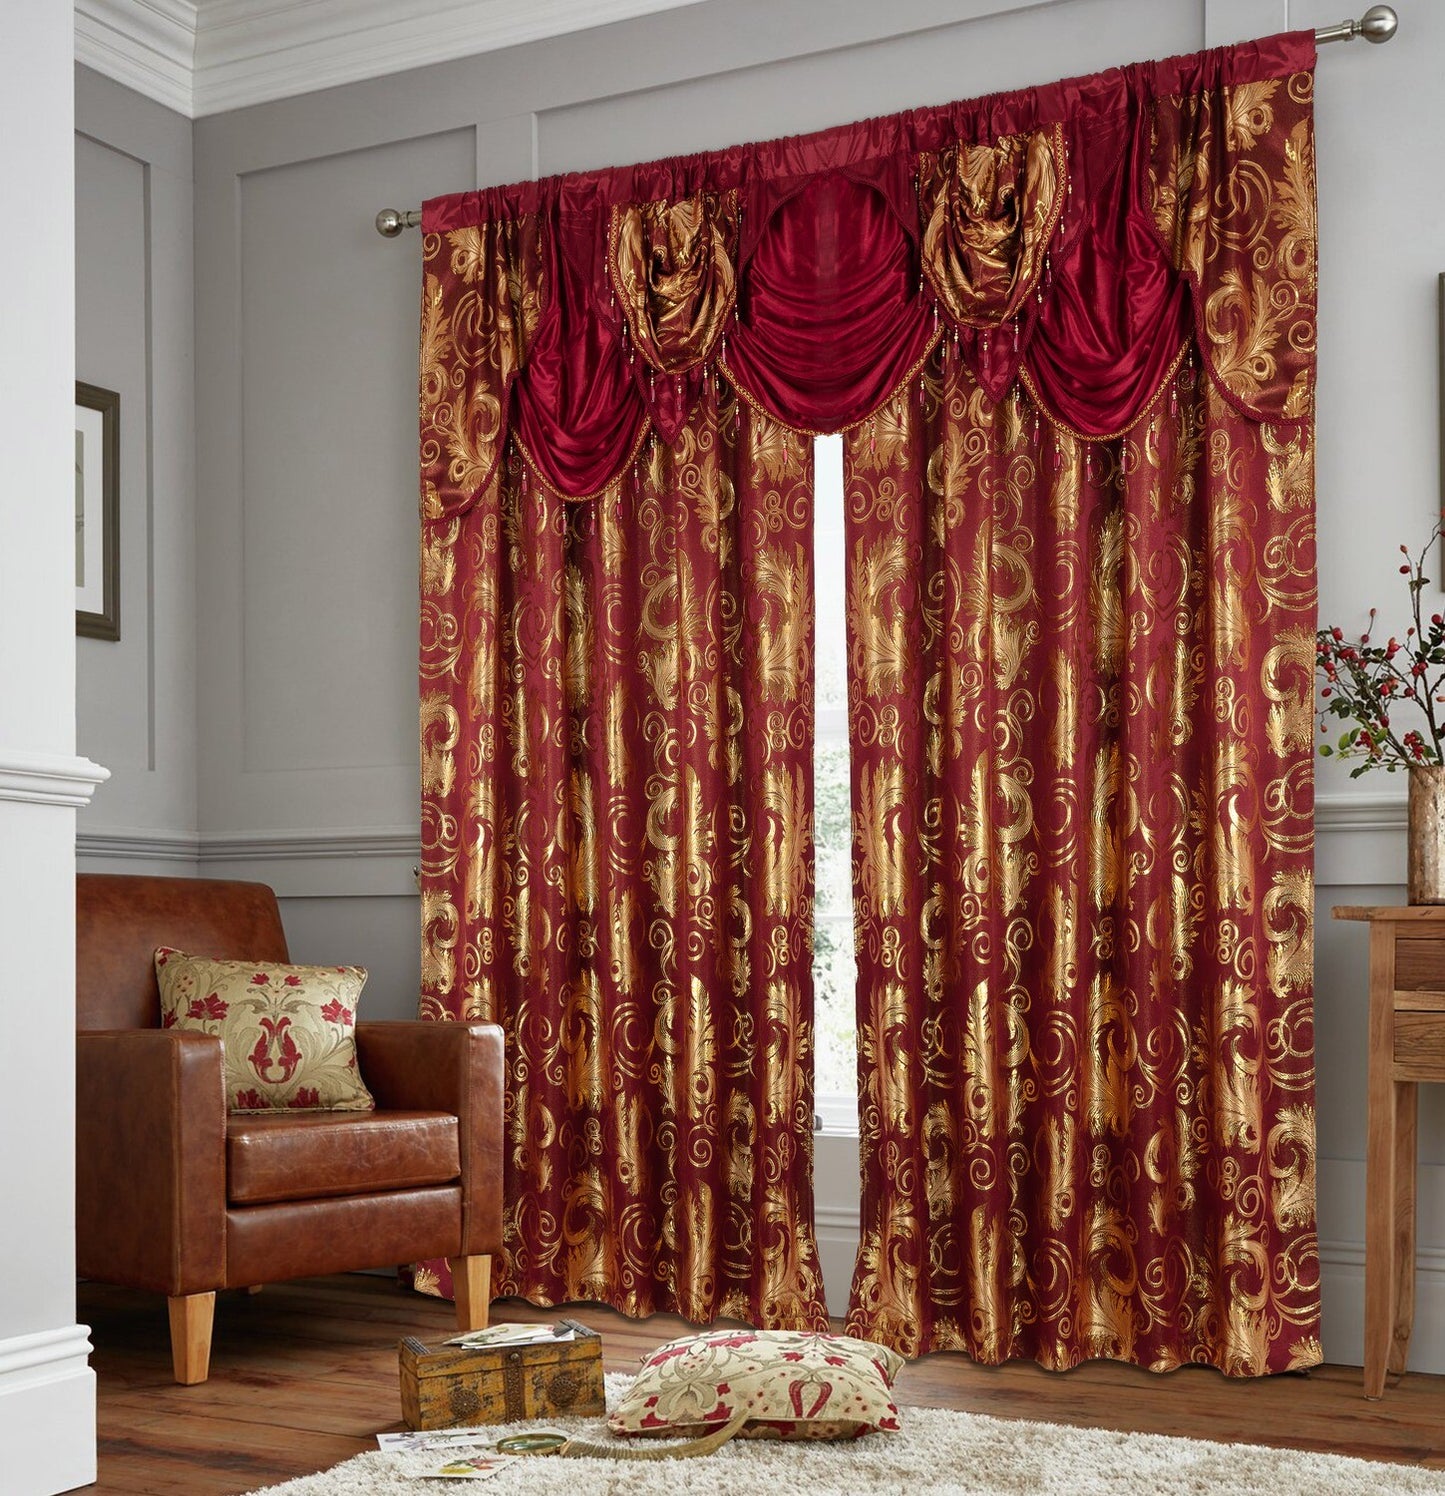 Glory Rugs Jacquard Luxury Curtain Window Panel Set Curtain with Attached Valance and Backing Bedroom Living Room Dining 110"X84" Each Jana Burgundy